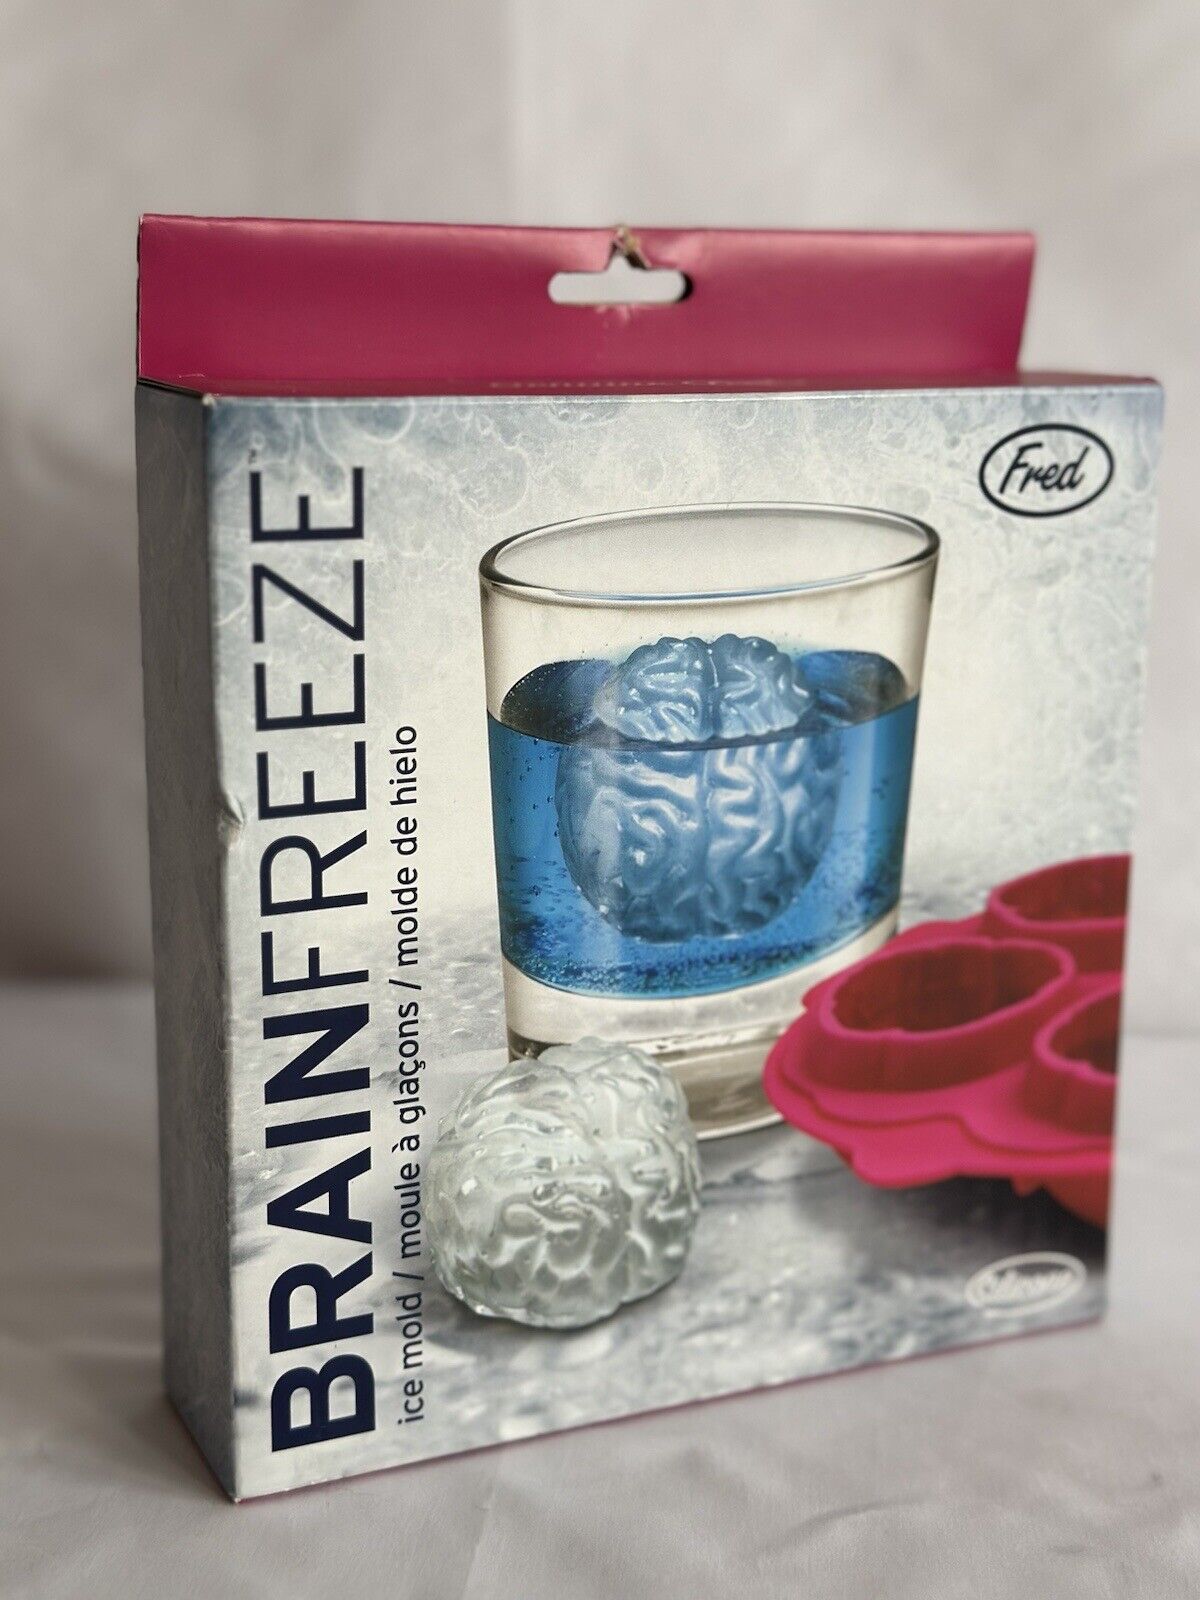 NEW Brain Freeze Ice Cube Mold Tray by Fred Perfect for Halloween